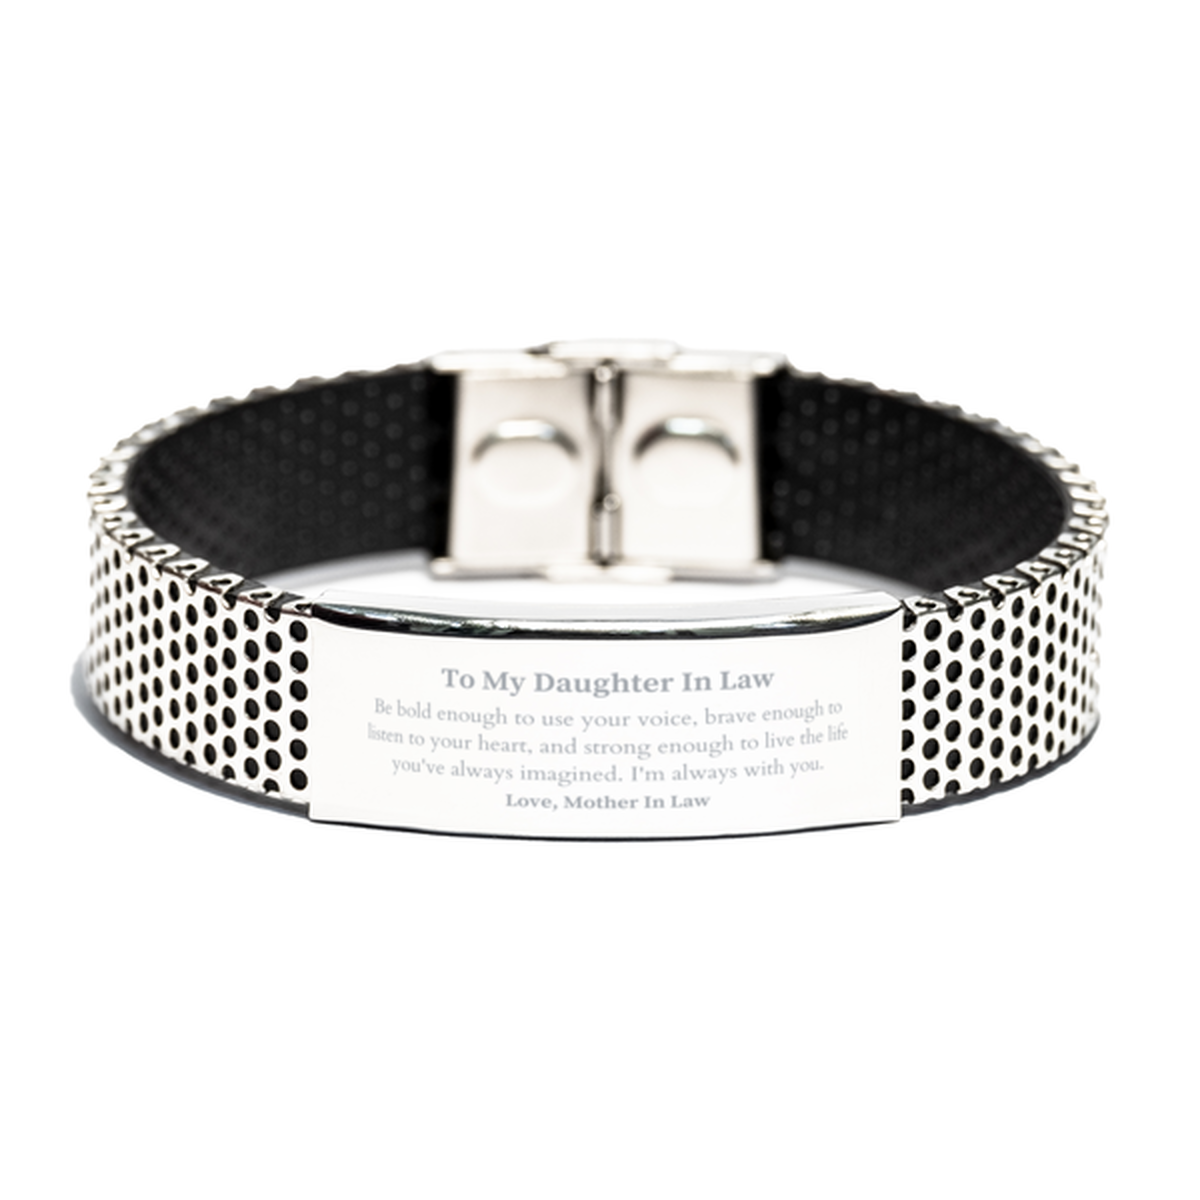 Keepsake Daughter In Law Stainless Steel Bracelet Gift Idea Graduation Christmas Birthday Daughter In Law from Mother In Law, Daughter In Law Be bold enough to use your voice, brave enough to listen to your heart. Love, Mother In Law